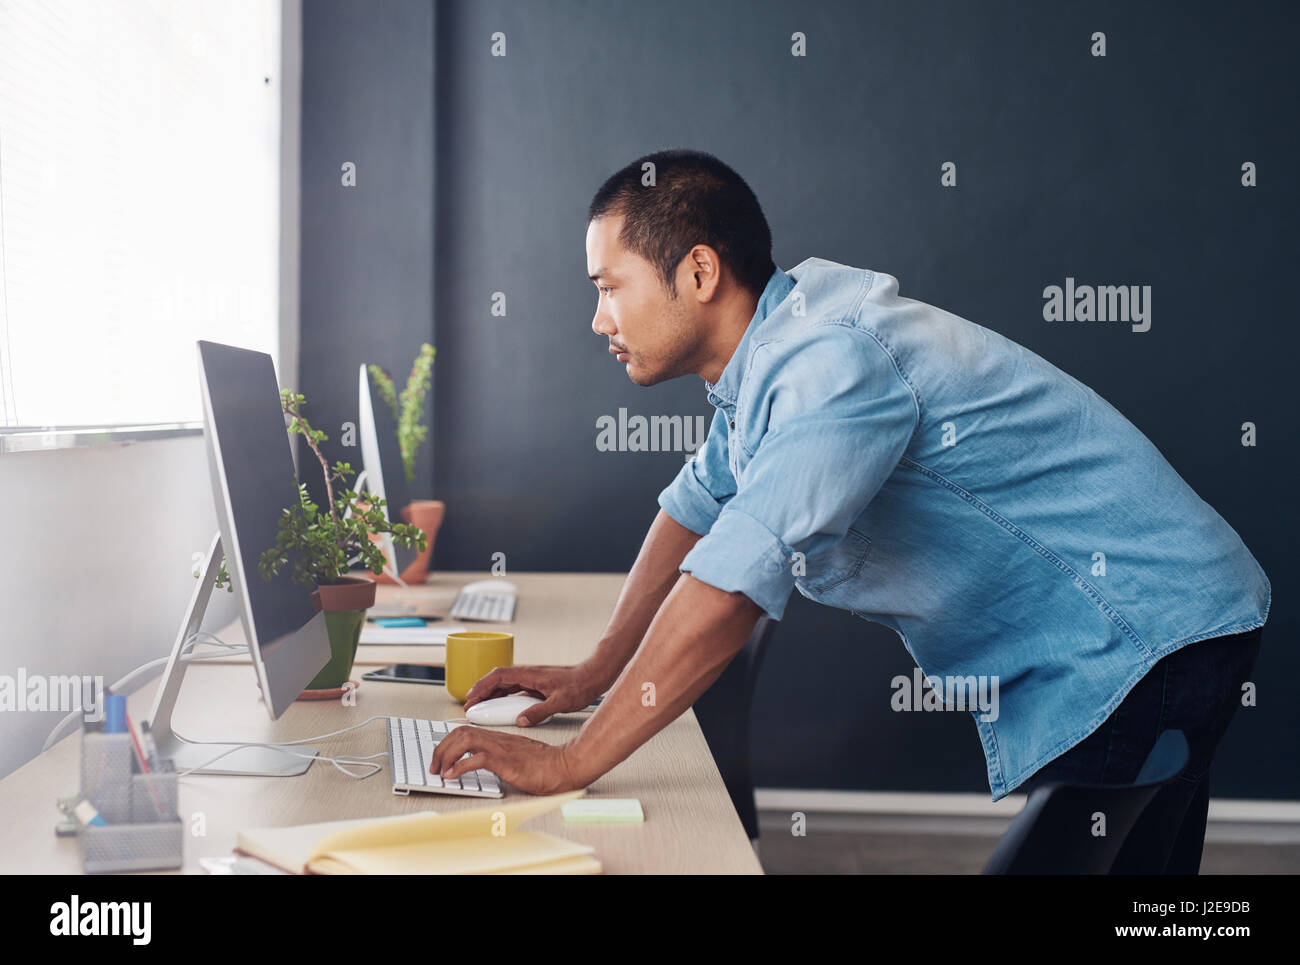 Young Asian designer standing at his desk using a computer Stock Photo